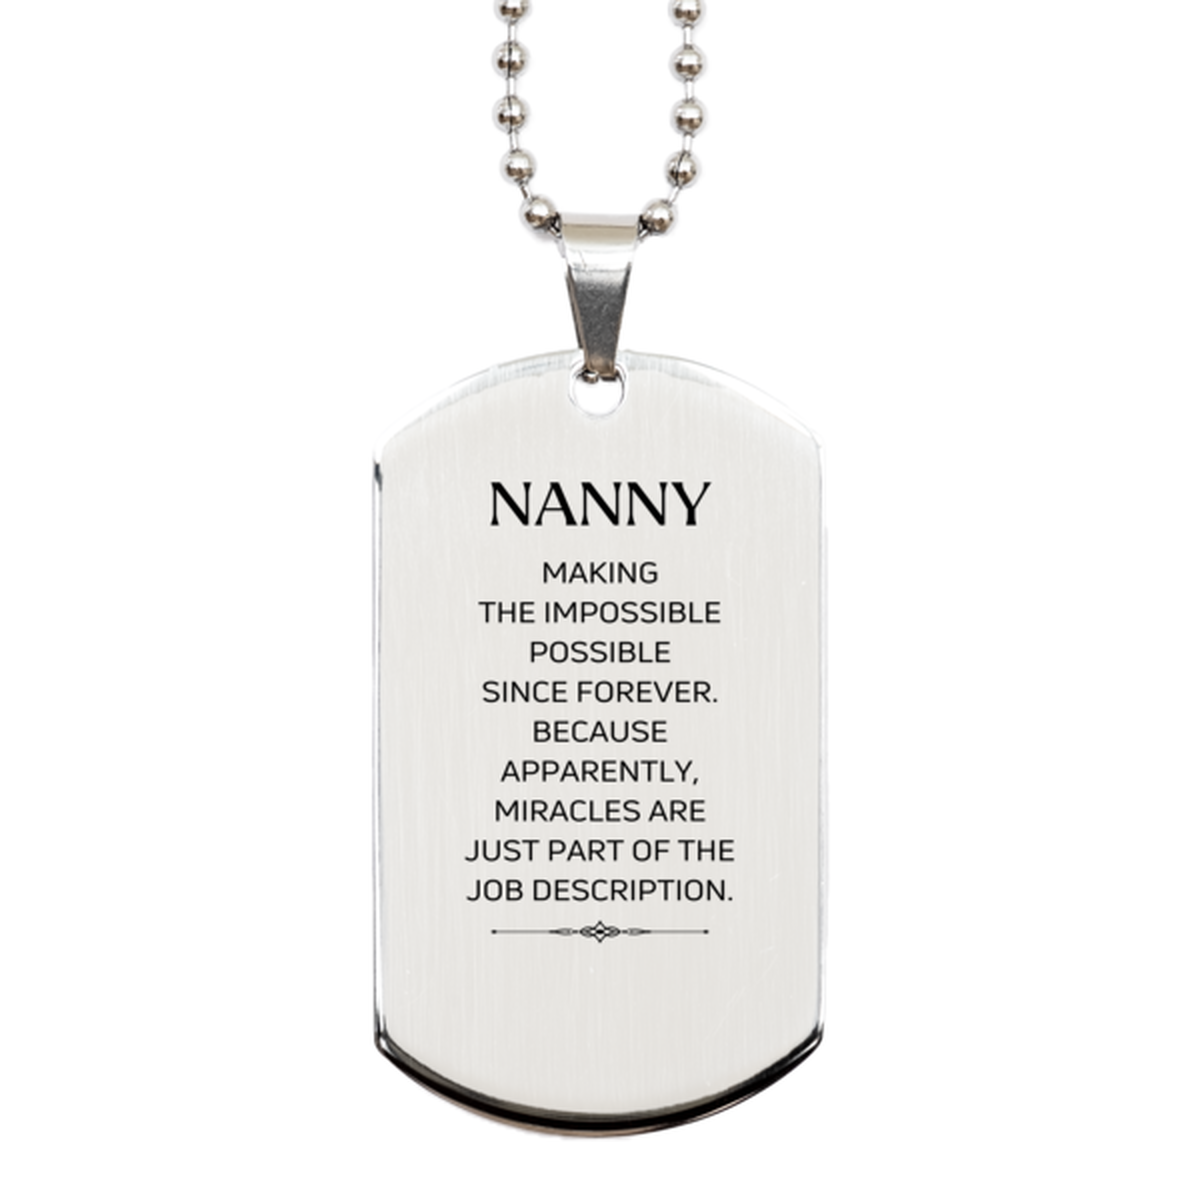 Funny Nanny Gifts, Miracles are just part of the job description, Inspirational Birthday Silver Dog Tag For Nanny, Men, Women, Coworkers, Friends, Boss